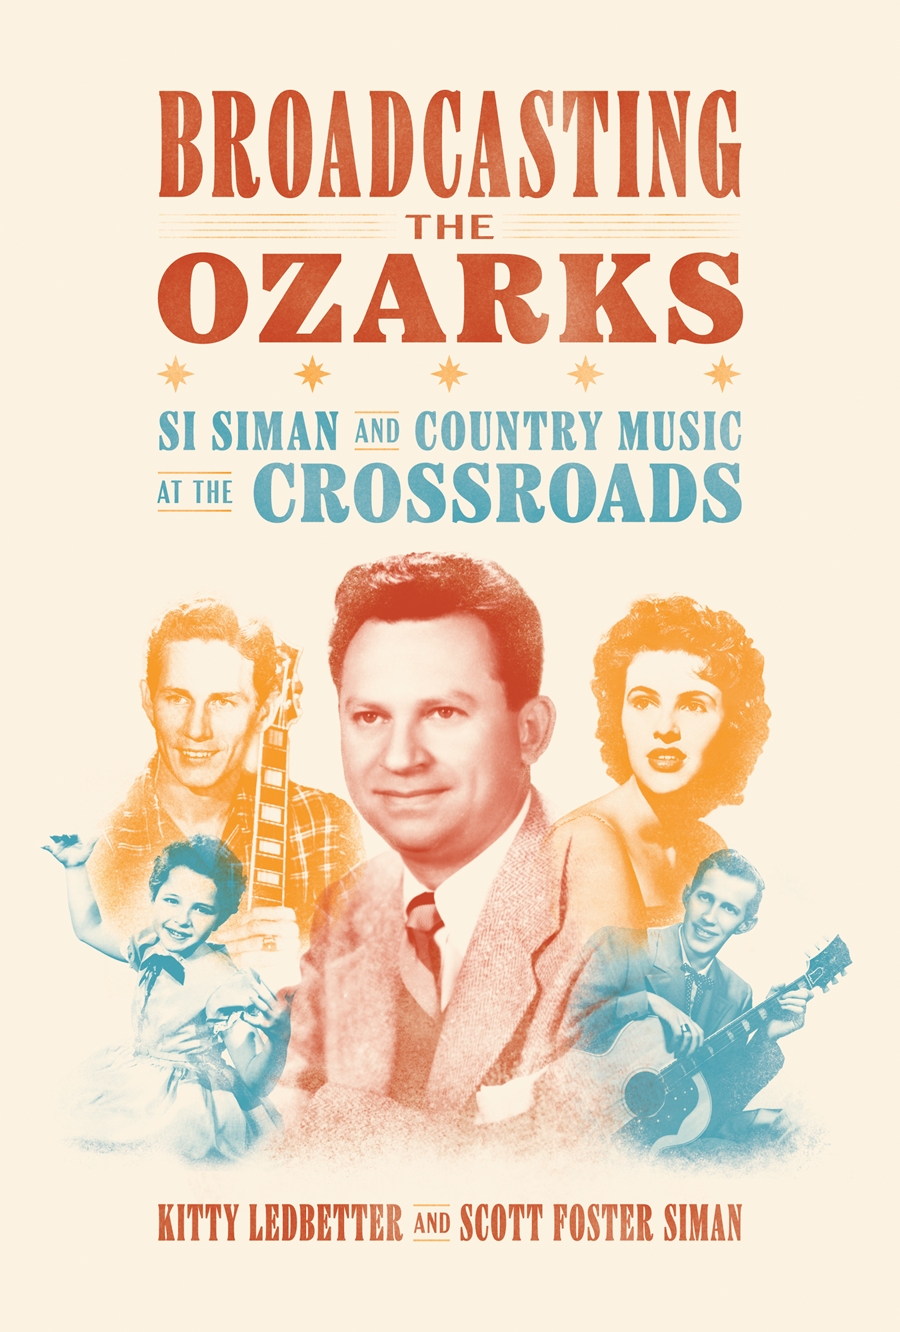  New Book Explores Early 20th Century Country Music in Springfield, Missouri 